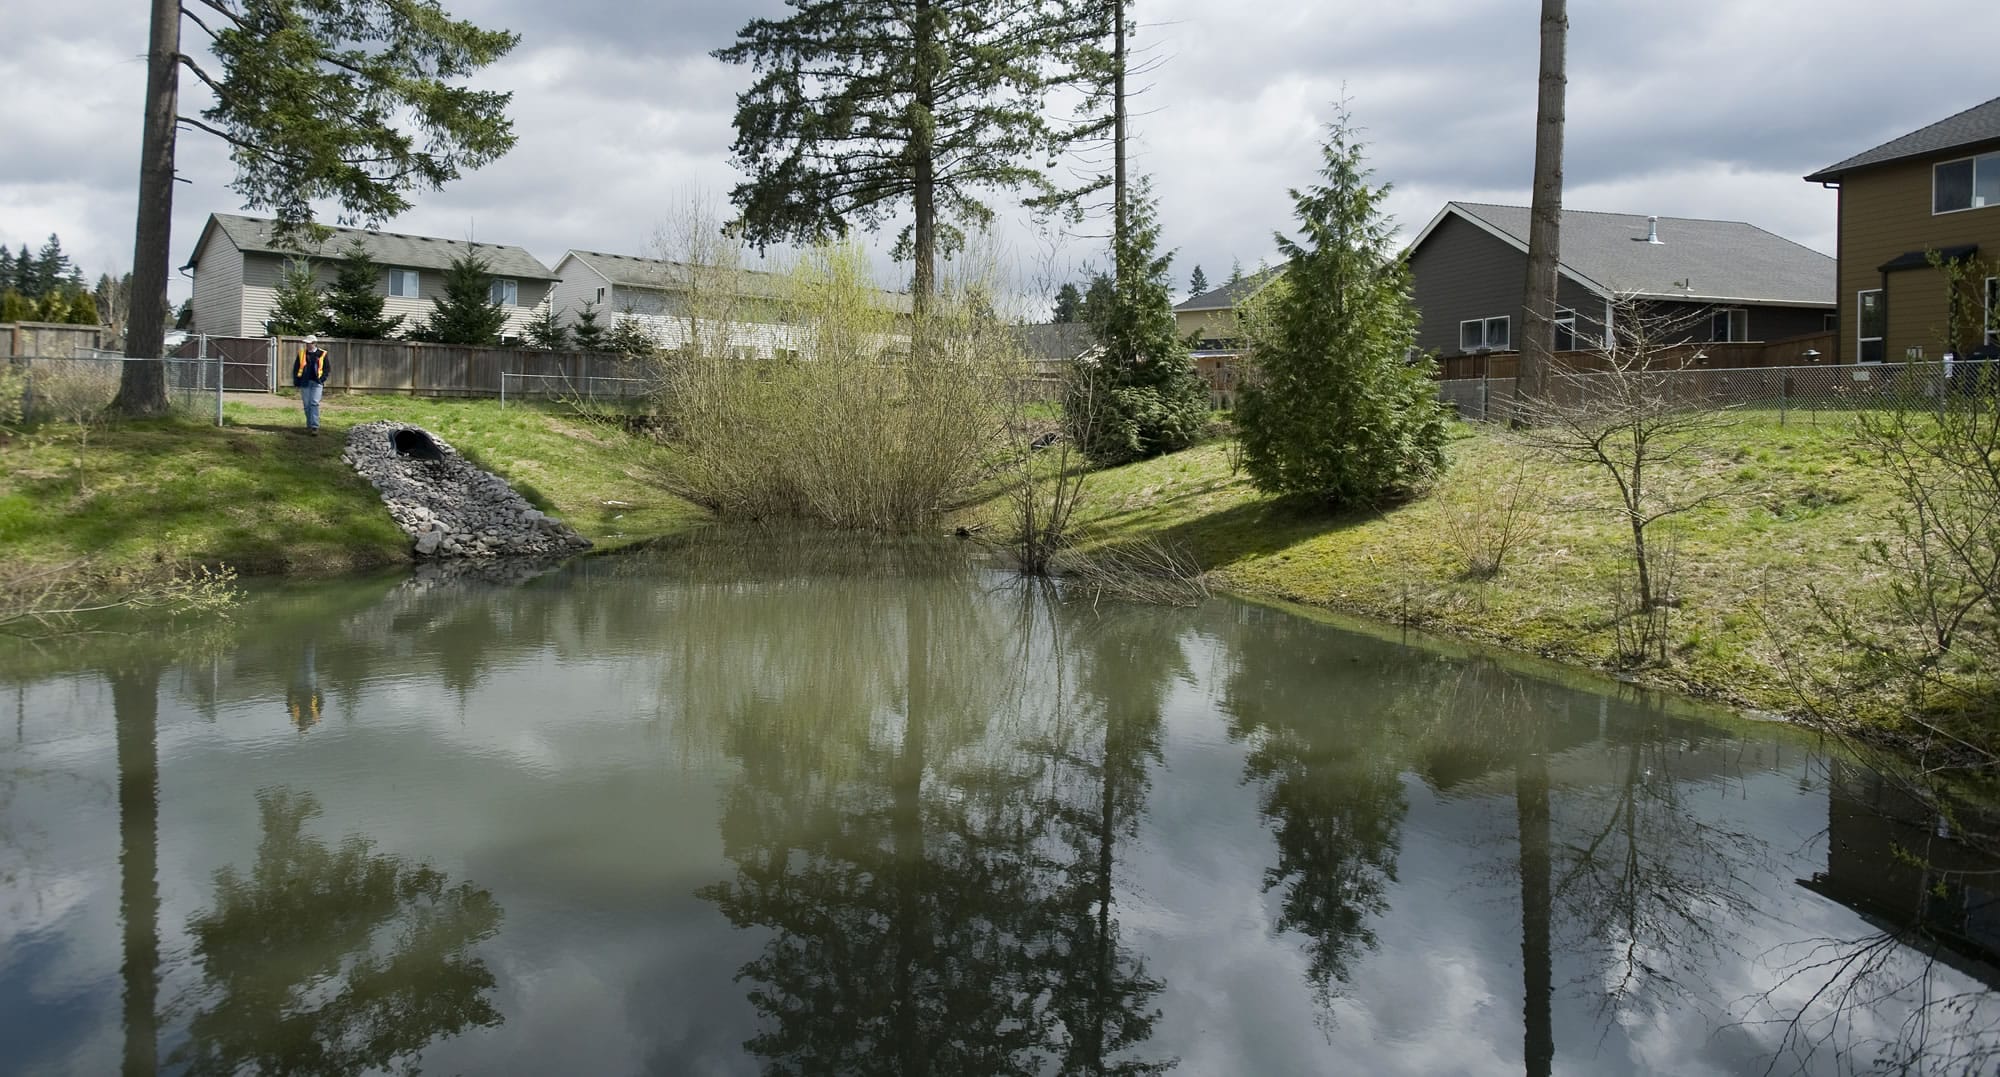 Cary Armstrong, Source Control Specialist with the Clark County Department of Environmental Services, shows a well maintained stormwater site in a Vancouver neighborhood, Thursday, April 7, 2011.